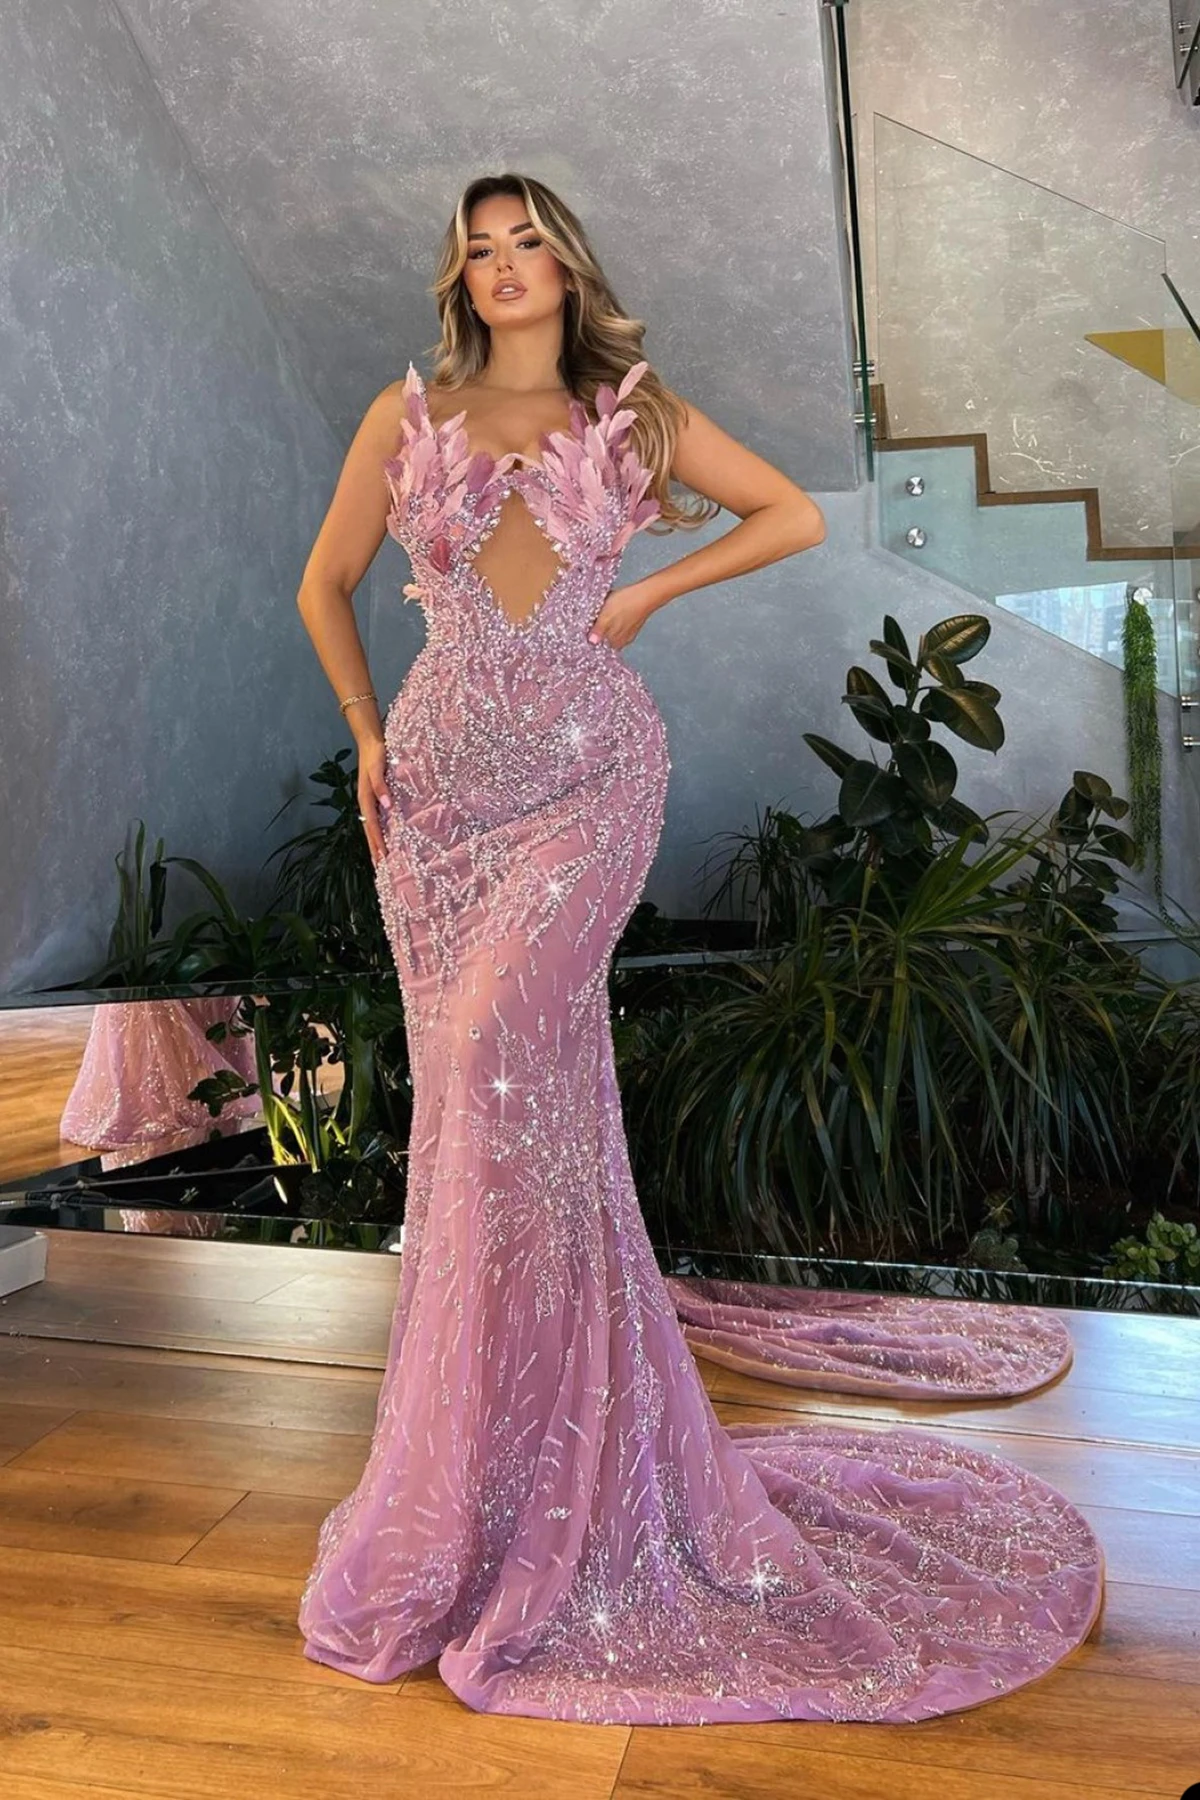 Fancy Pearls Mermaid Evening Dresses Feathers Spaghetti Straps Prom Gowns Custom Made Sequined Beaded Party Dresses